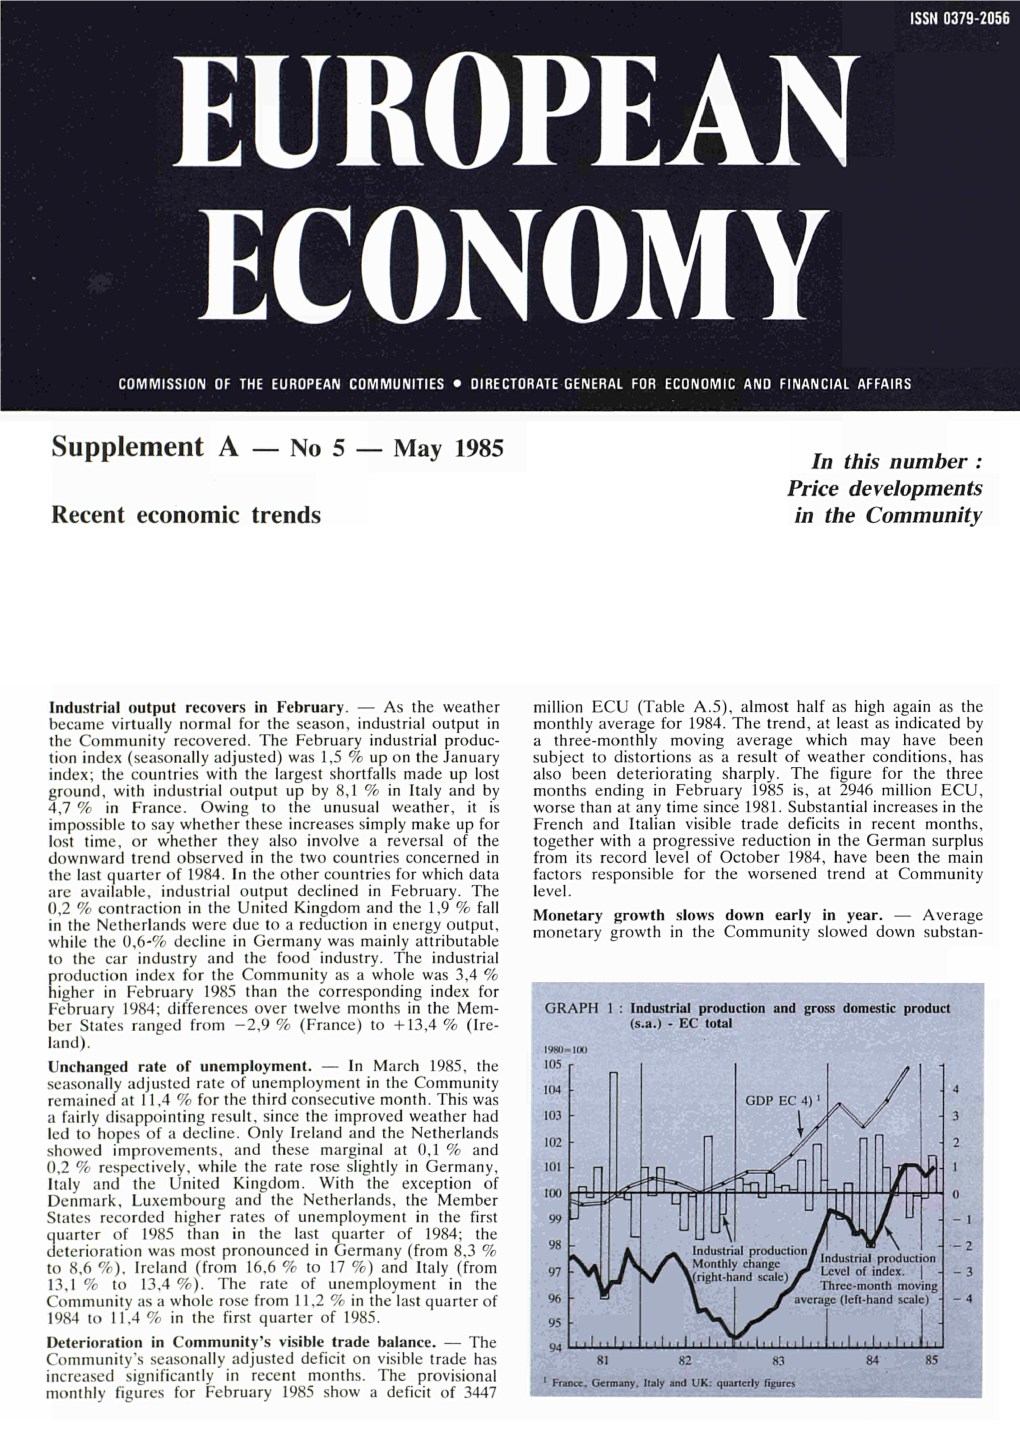 EUROPEAN ECONOMY : Supplement a — No 5 — May 1985